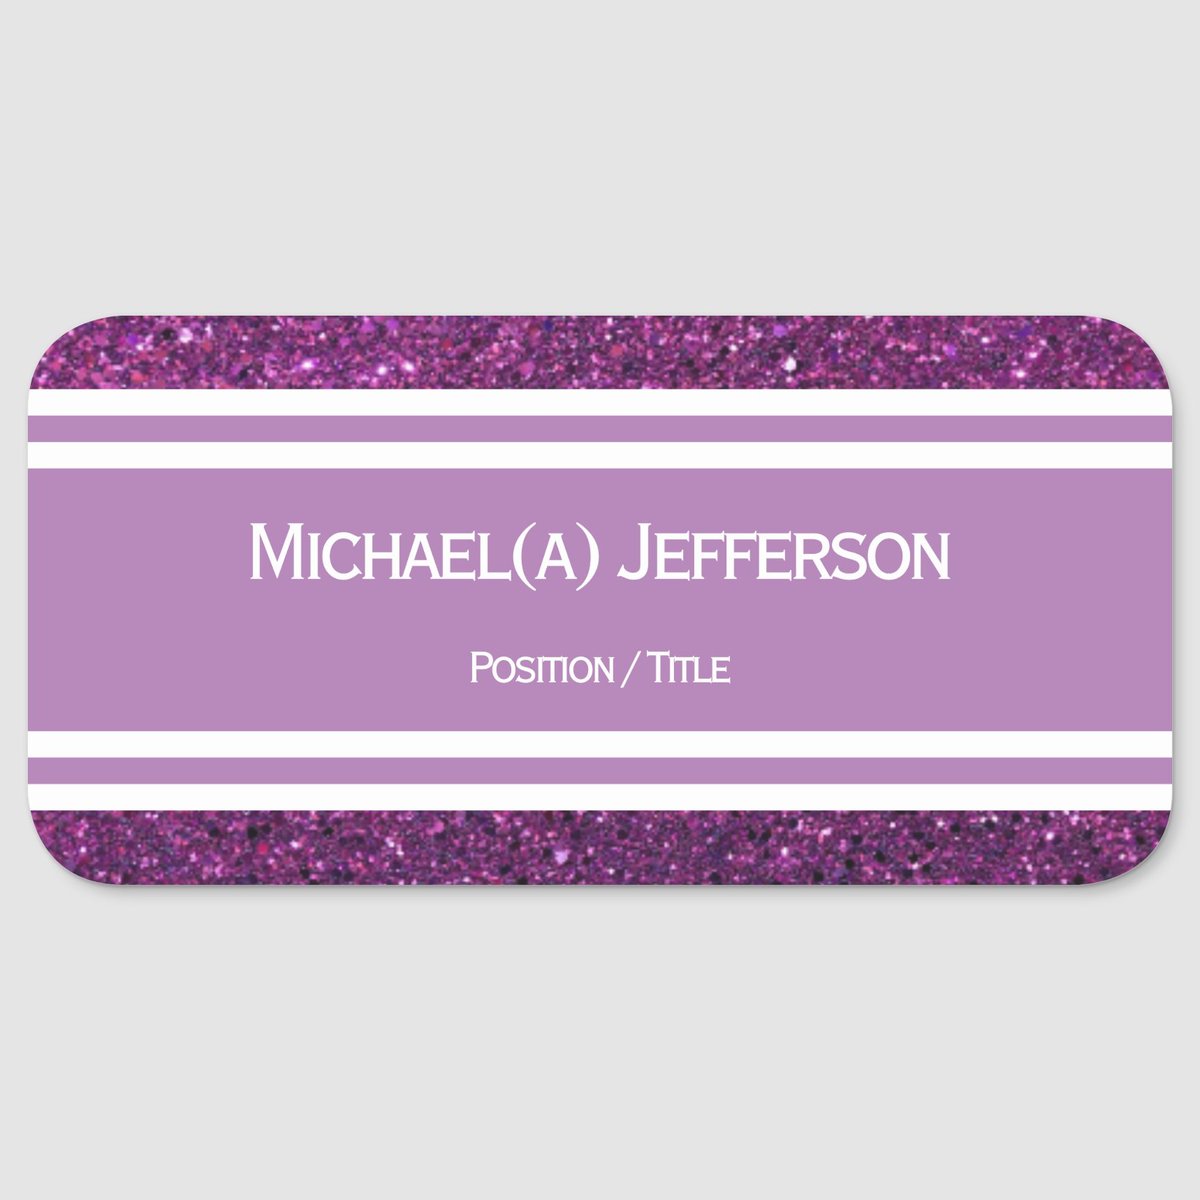 Blending contemporary allure with classic sophistication zazzle.com/lavender_purpl… #Glitter Purple #nametag can be #Personalizedgift for #corporate #employees #Professional #identity for every team #nametags Give a #corporategift #zazzlemade #zazzle #BusinessMan #BusinessSolutions